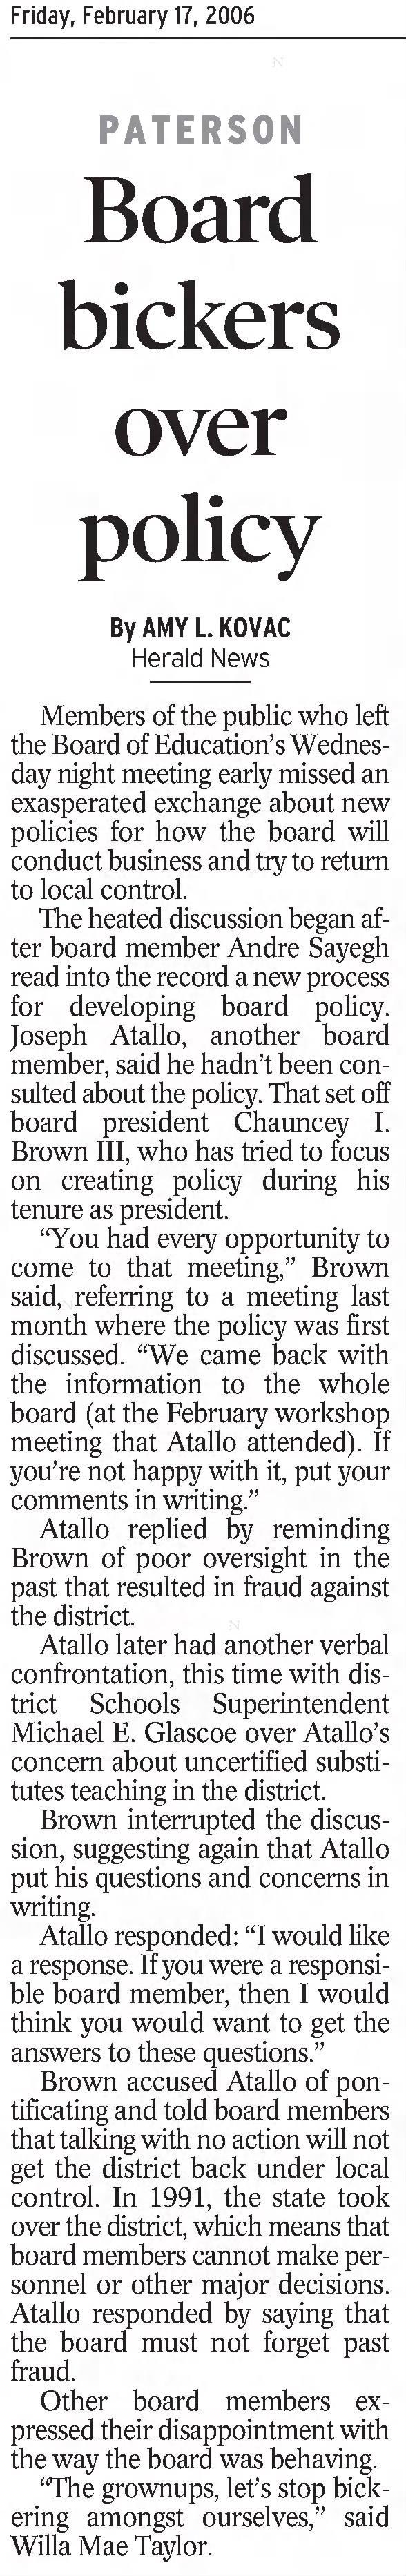 February 17, 2006-Board of Education President Chauncey I. Brown III. Policy & Governance Priority